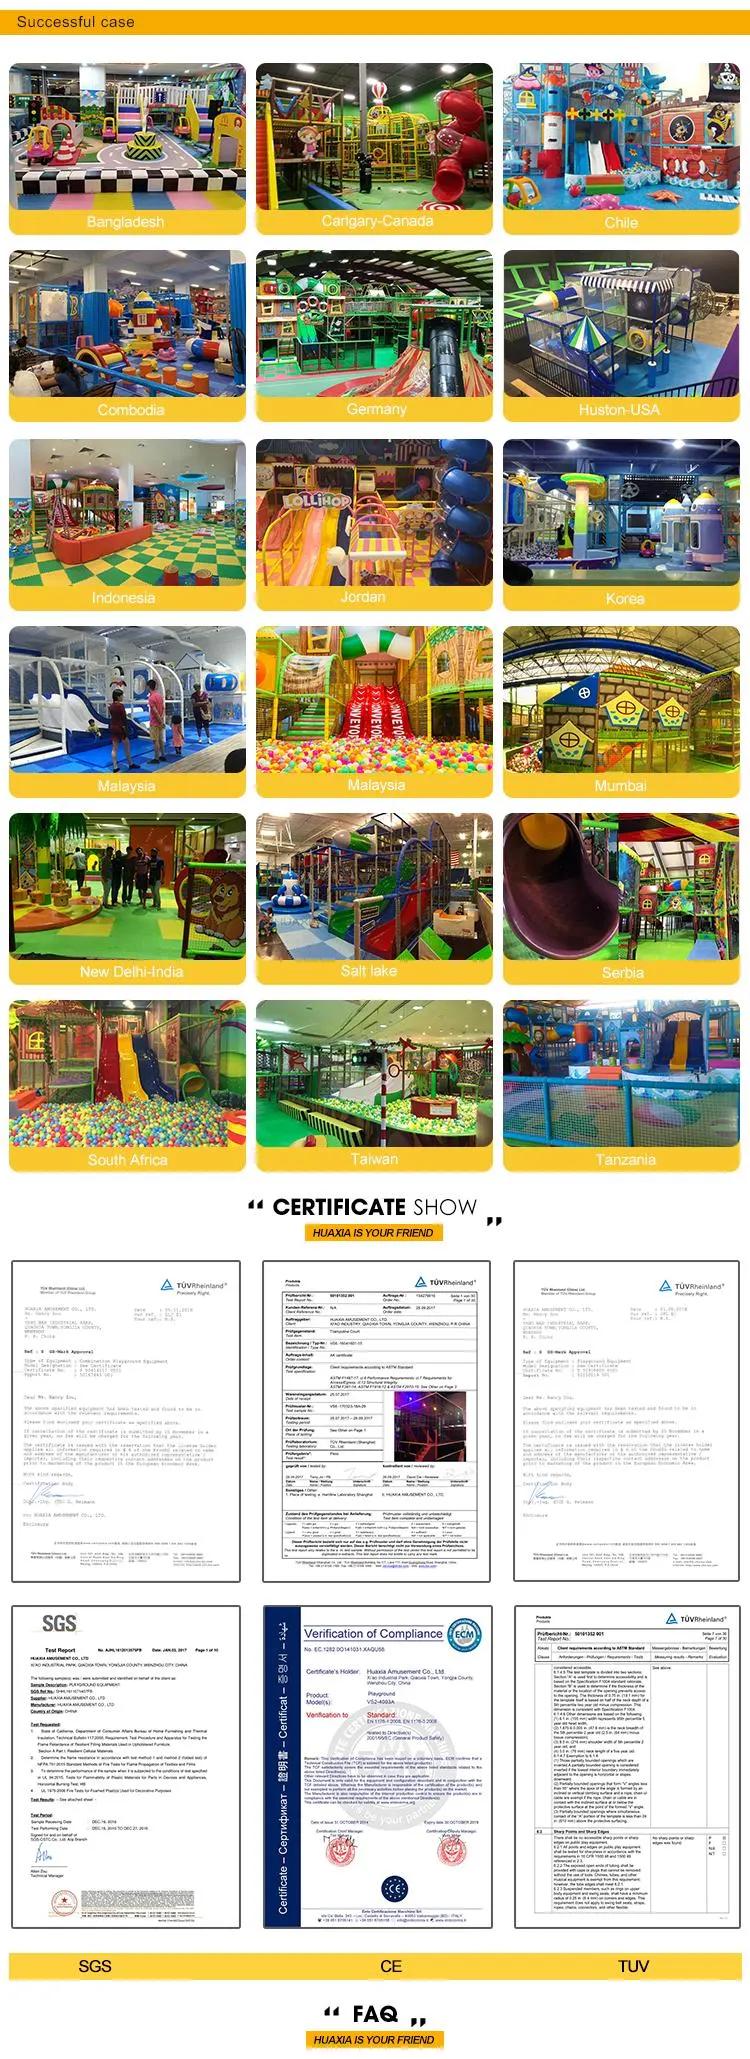 Amusement Park Indoor and Outdoor Obstacle Adventure Rope Course